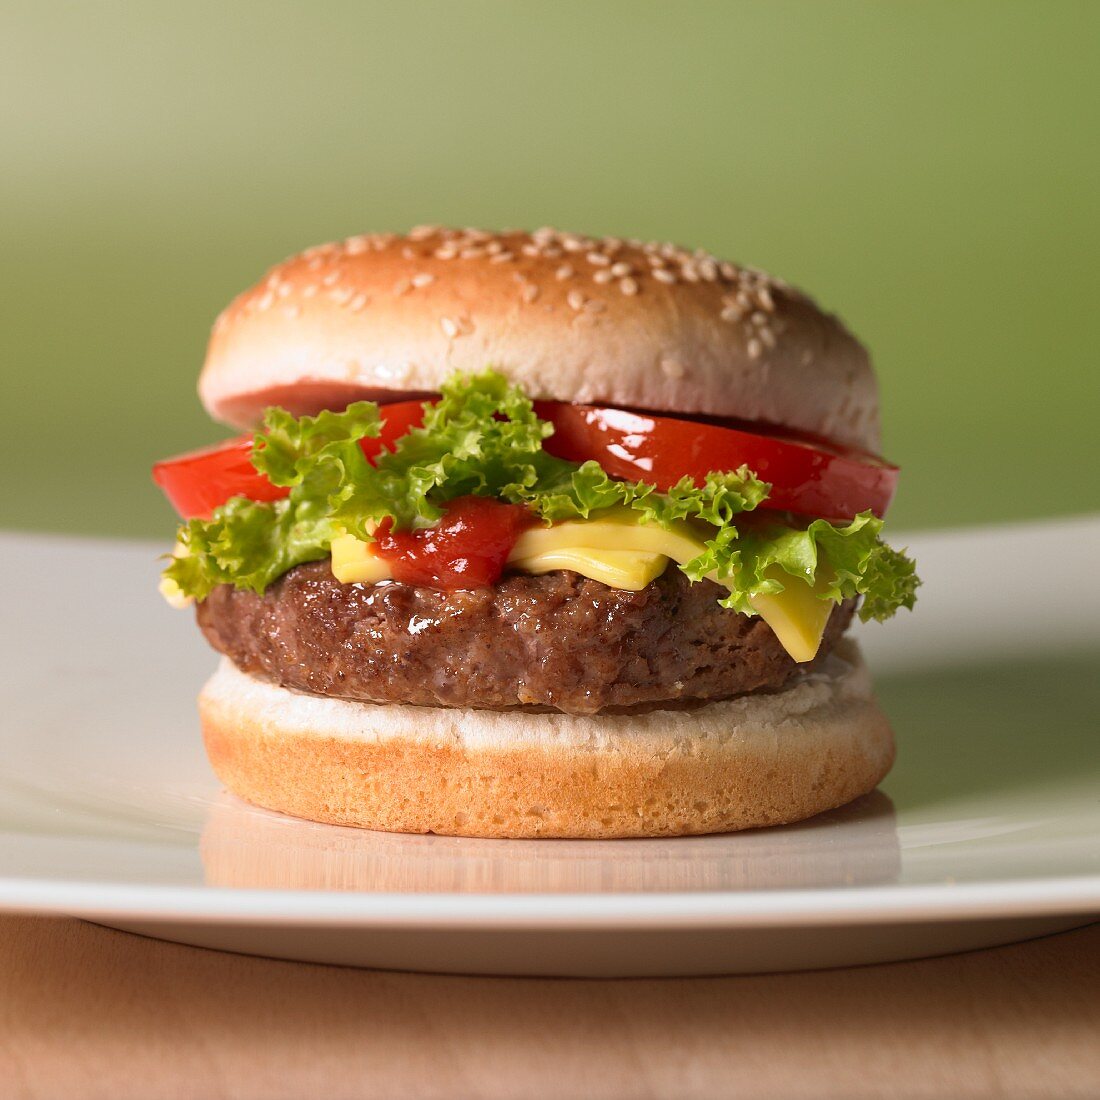 A cheeseburger with tomatoes and a lettuce leaf